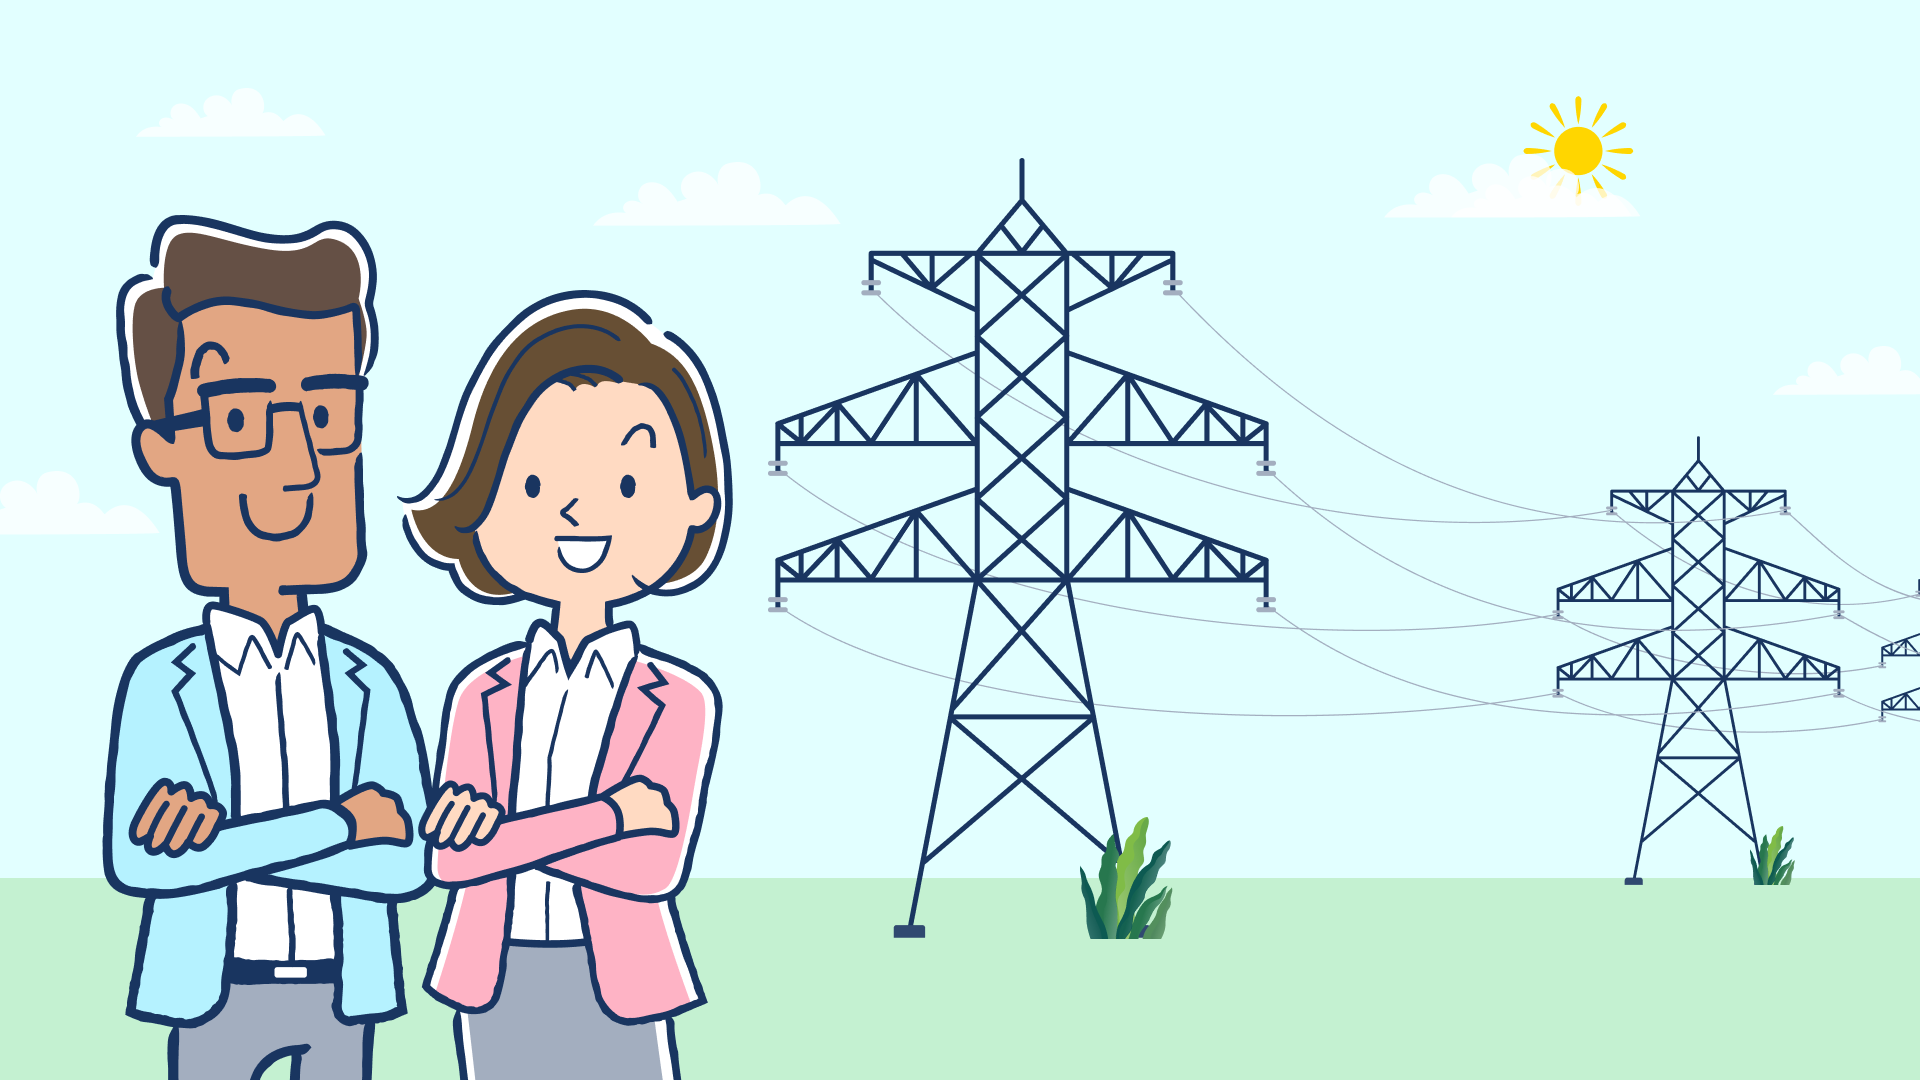 10 questions you should ask before switching energy providers